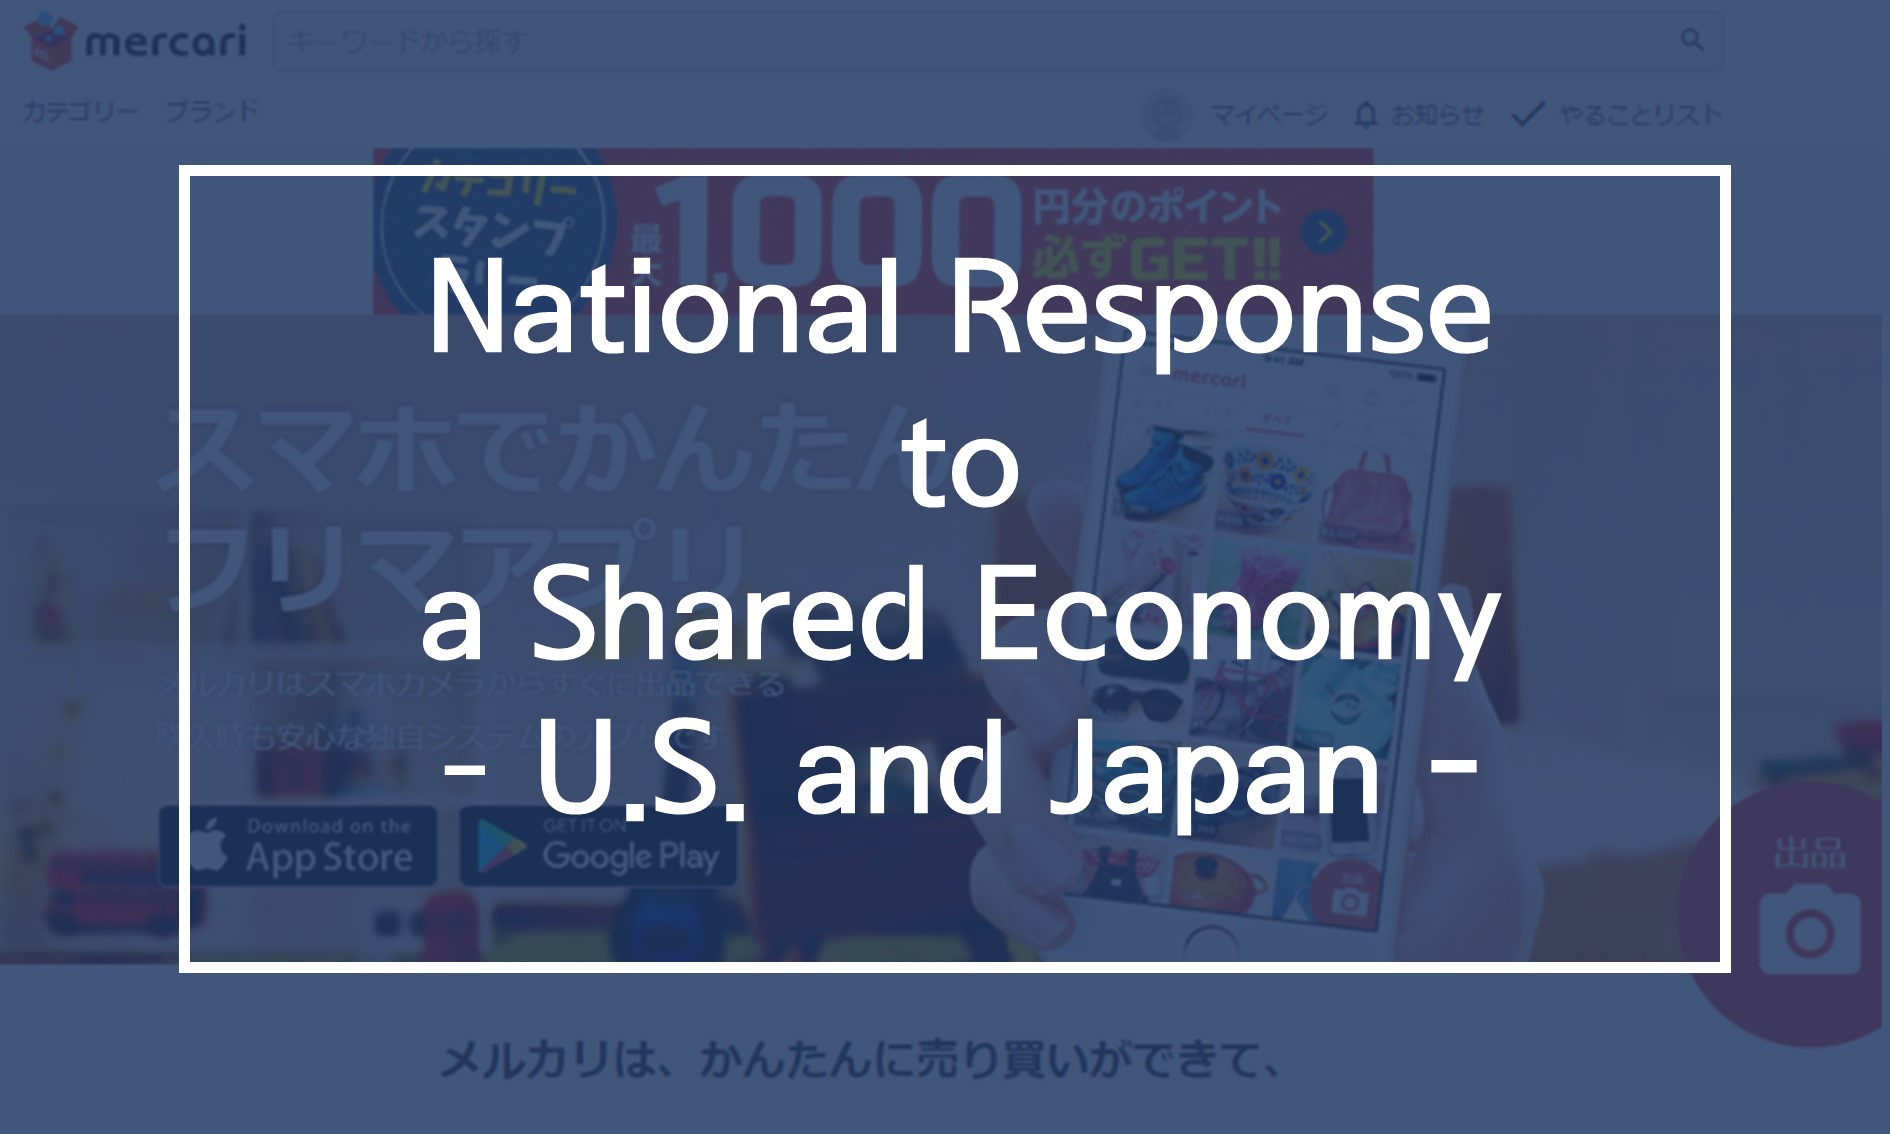 [Resources] National Response to a Shared Economy – U.S. and Japan